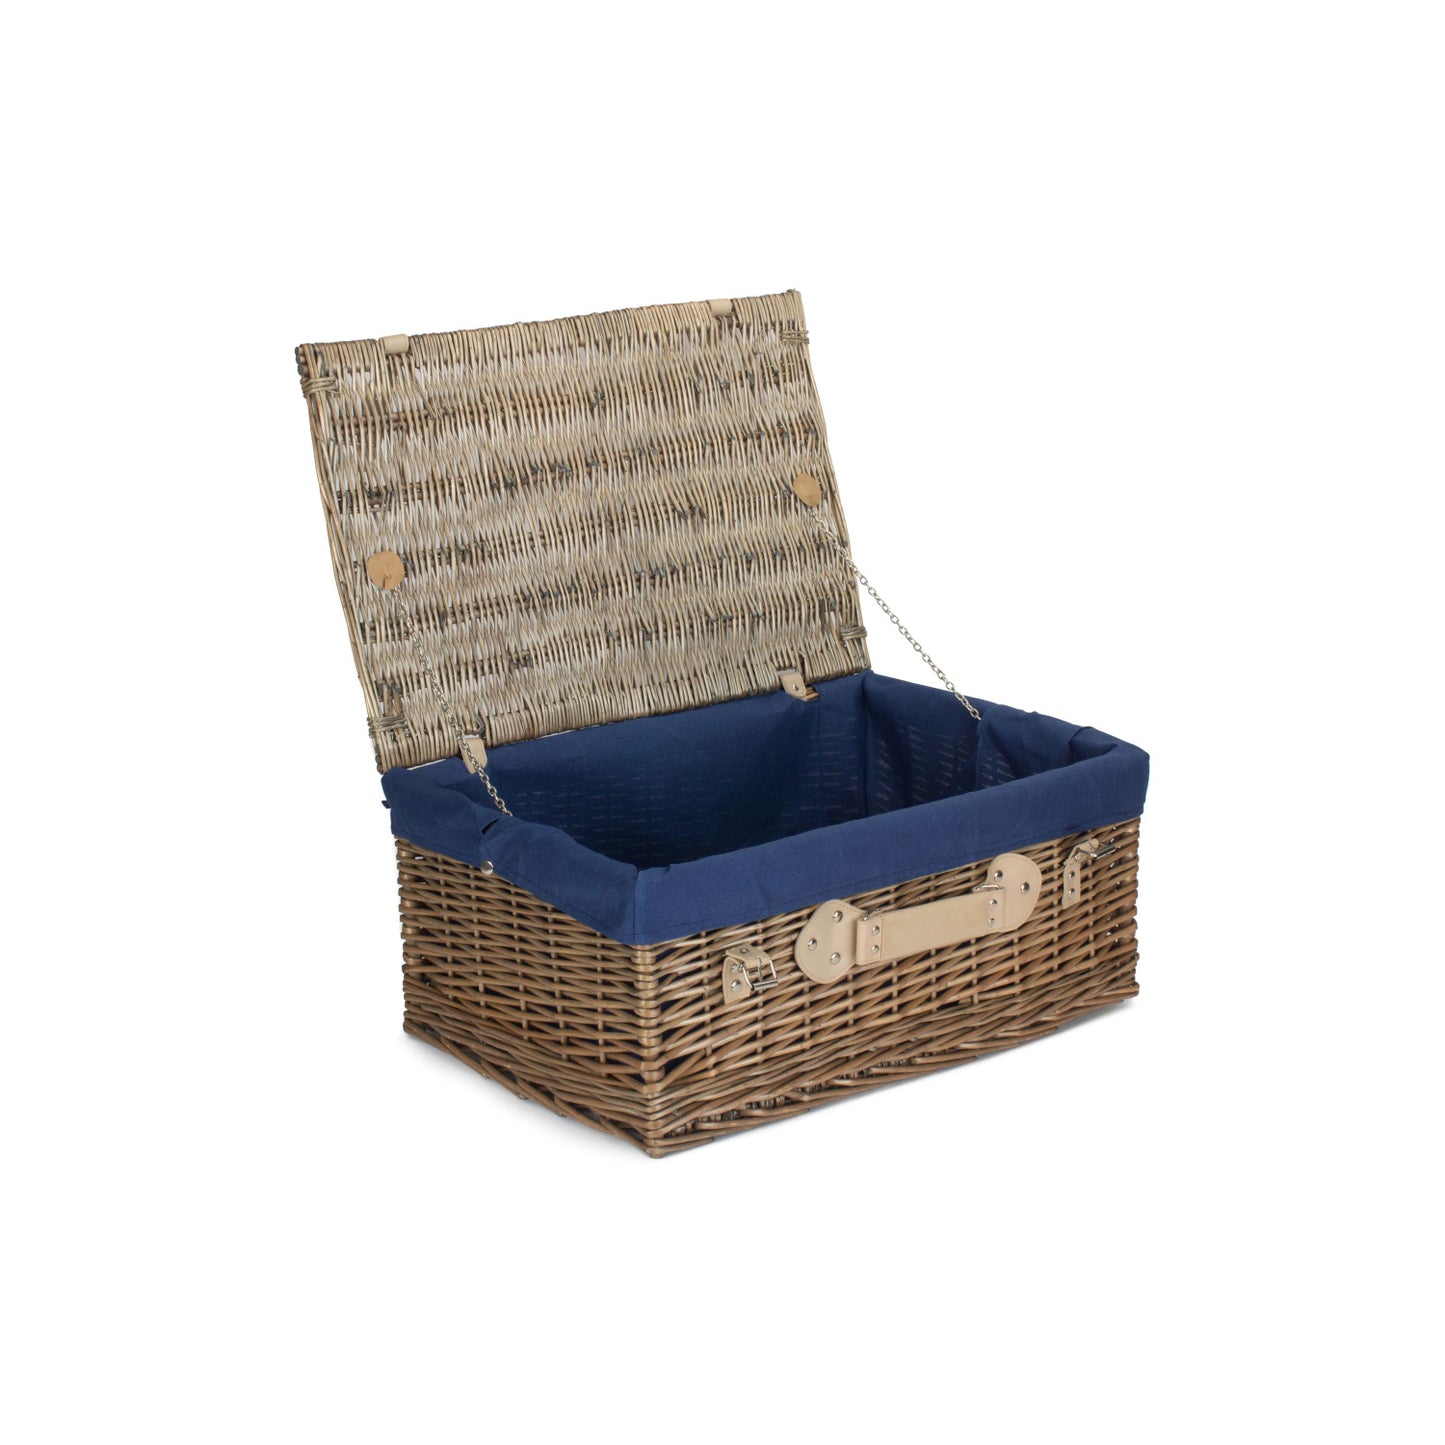 22 Inch Antique Wash Hamper With Navy Blue Lining